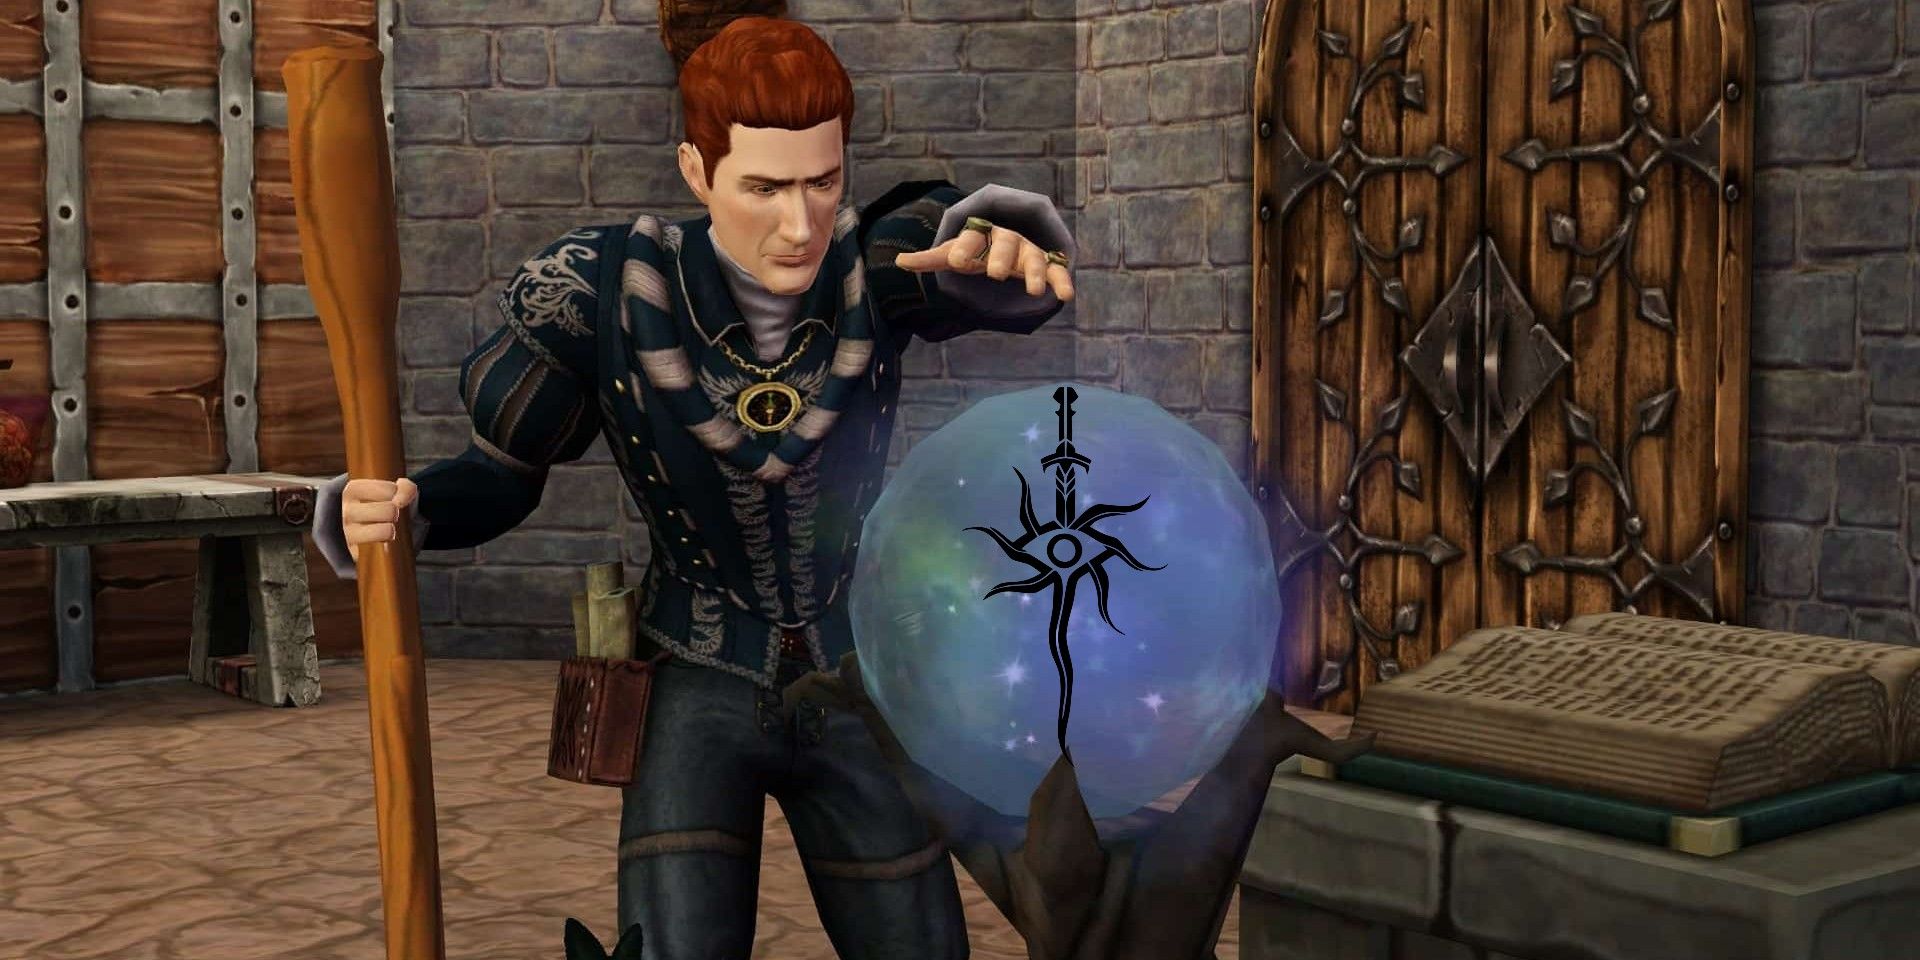 Sims 4 - Medieval Sim with a crystal ball that has the Dragon Age logo inside.